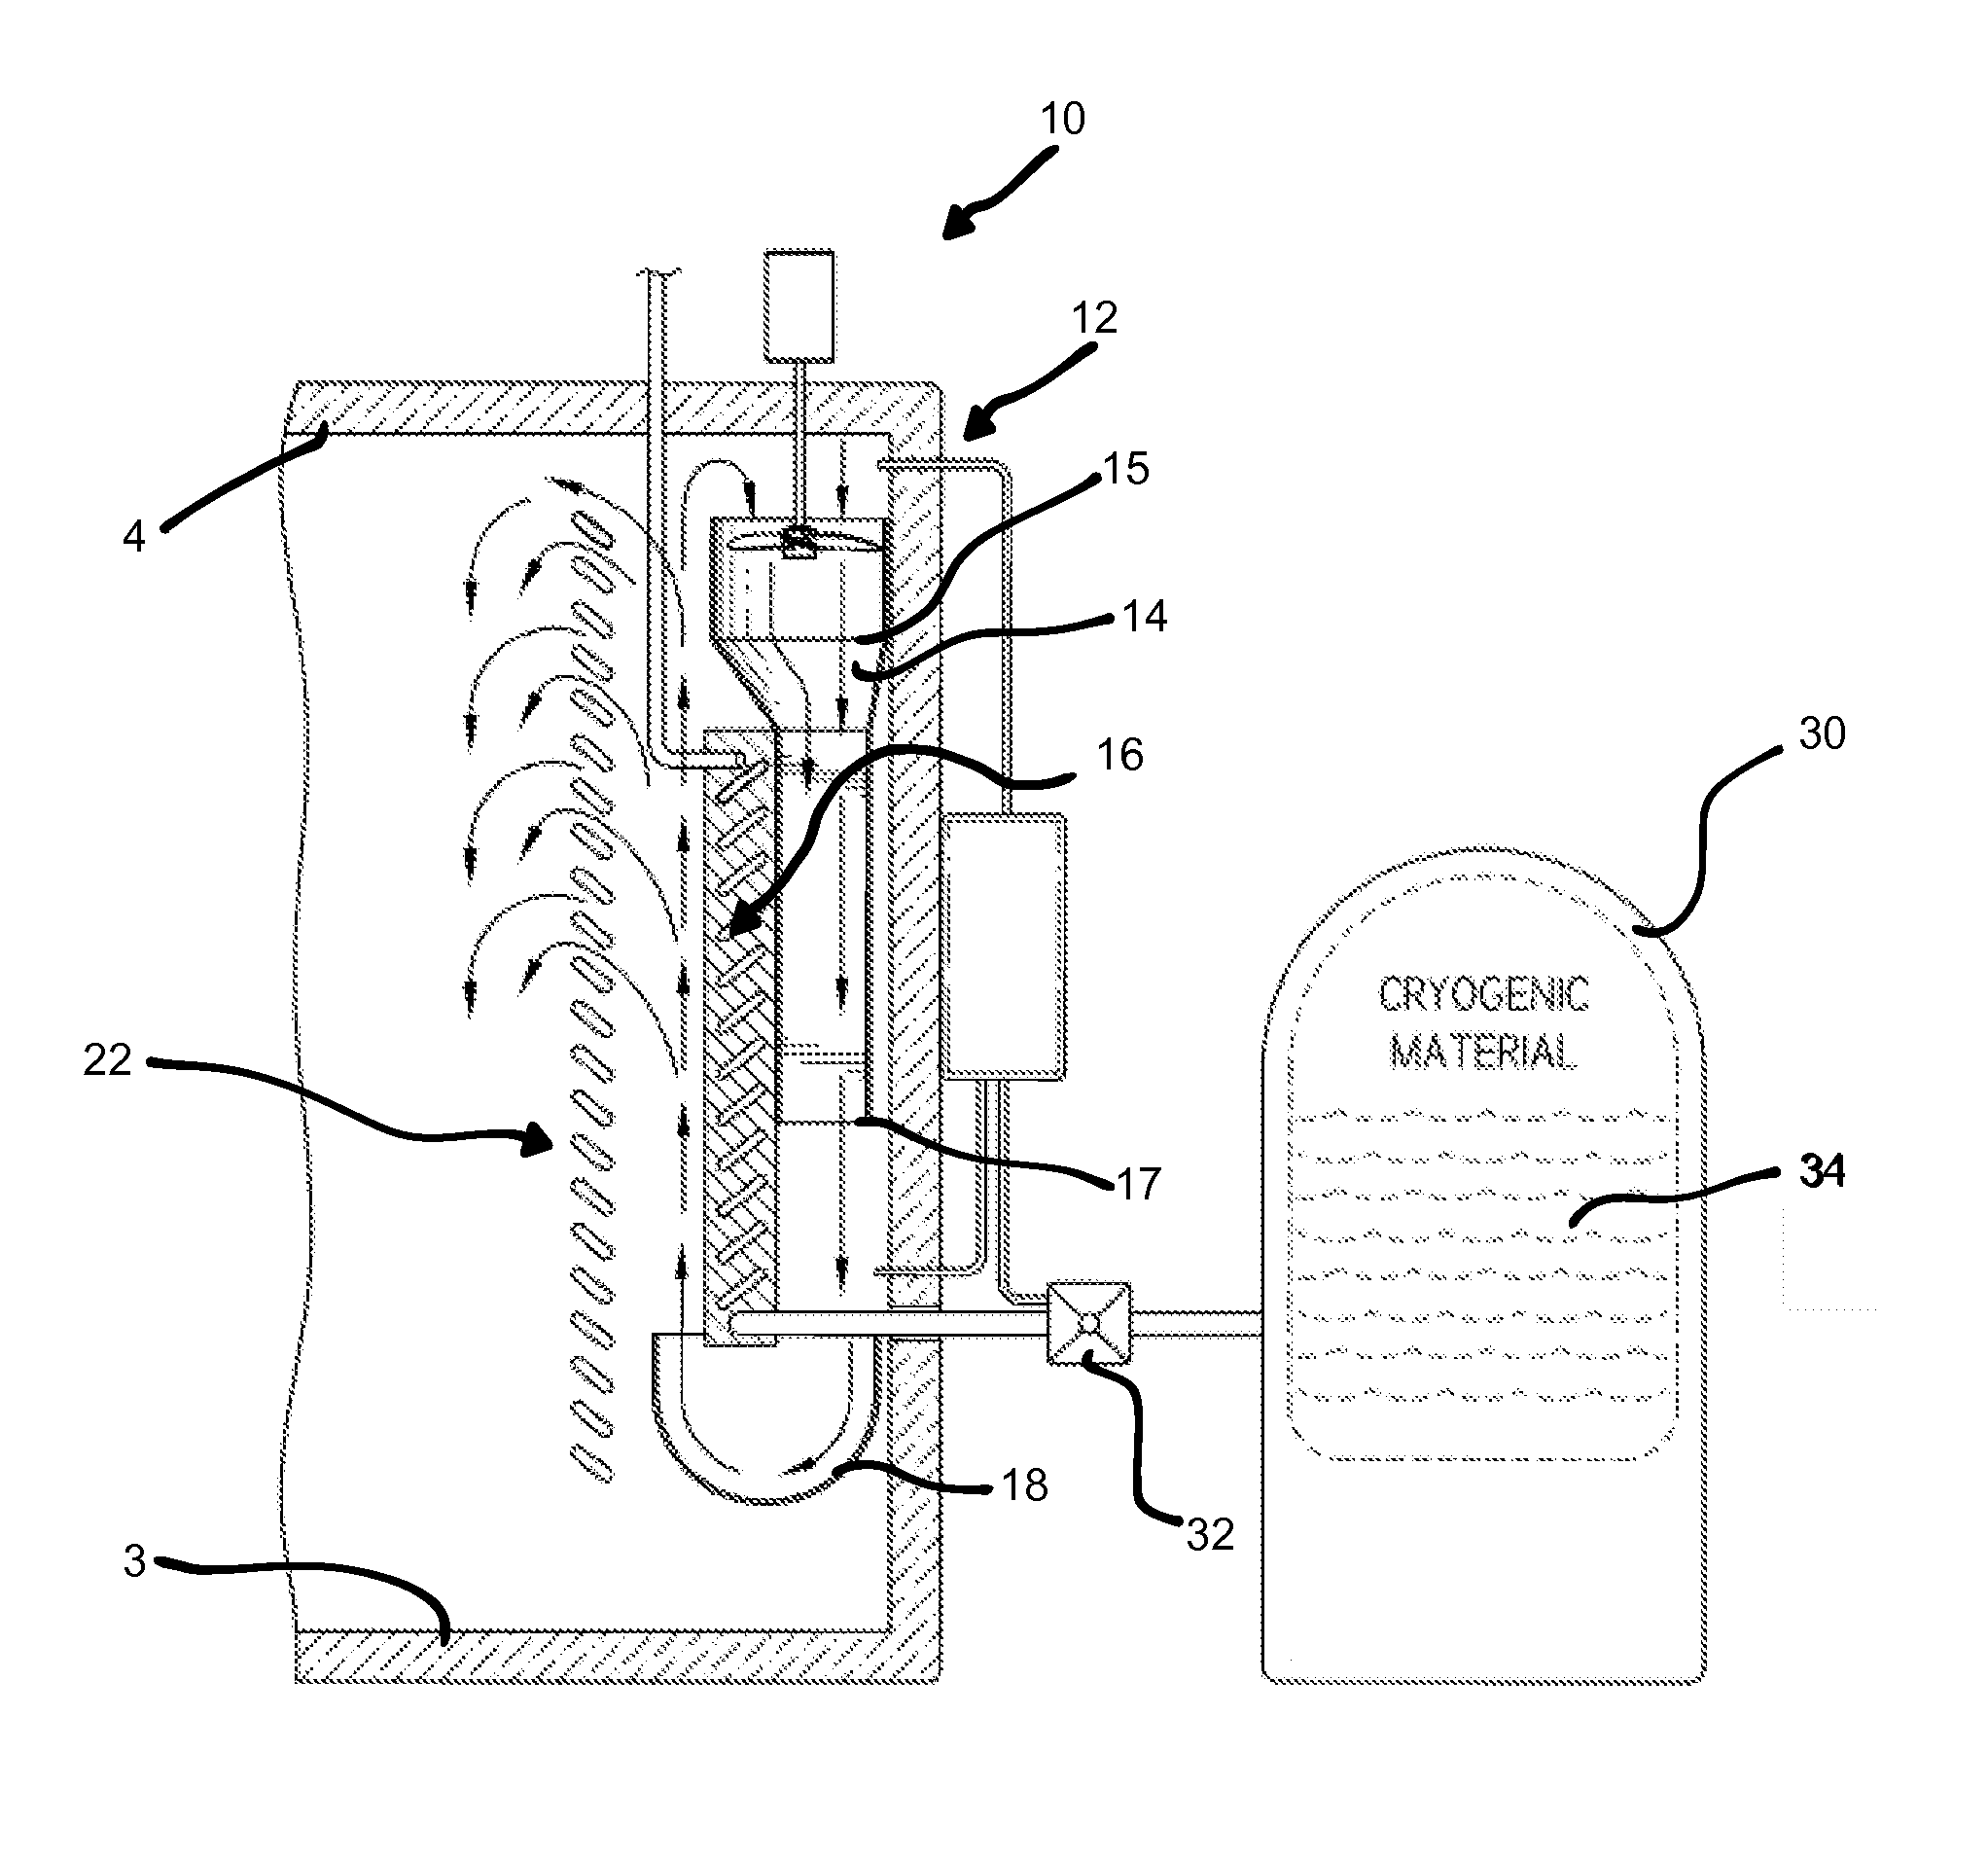 Apparatus for Uniform Total Body Cryotherapy